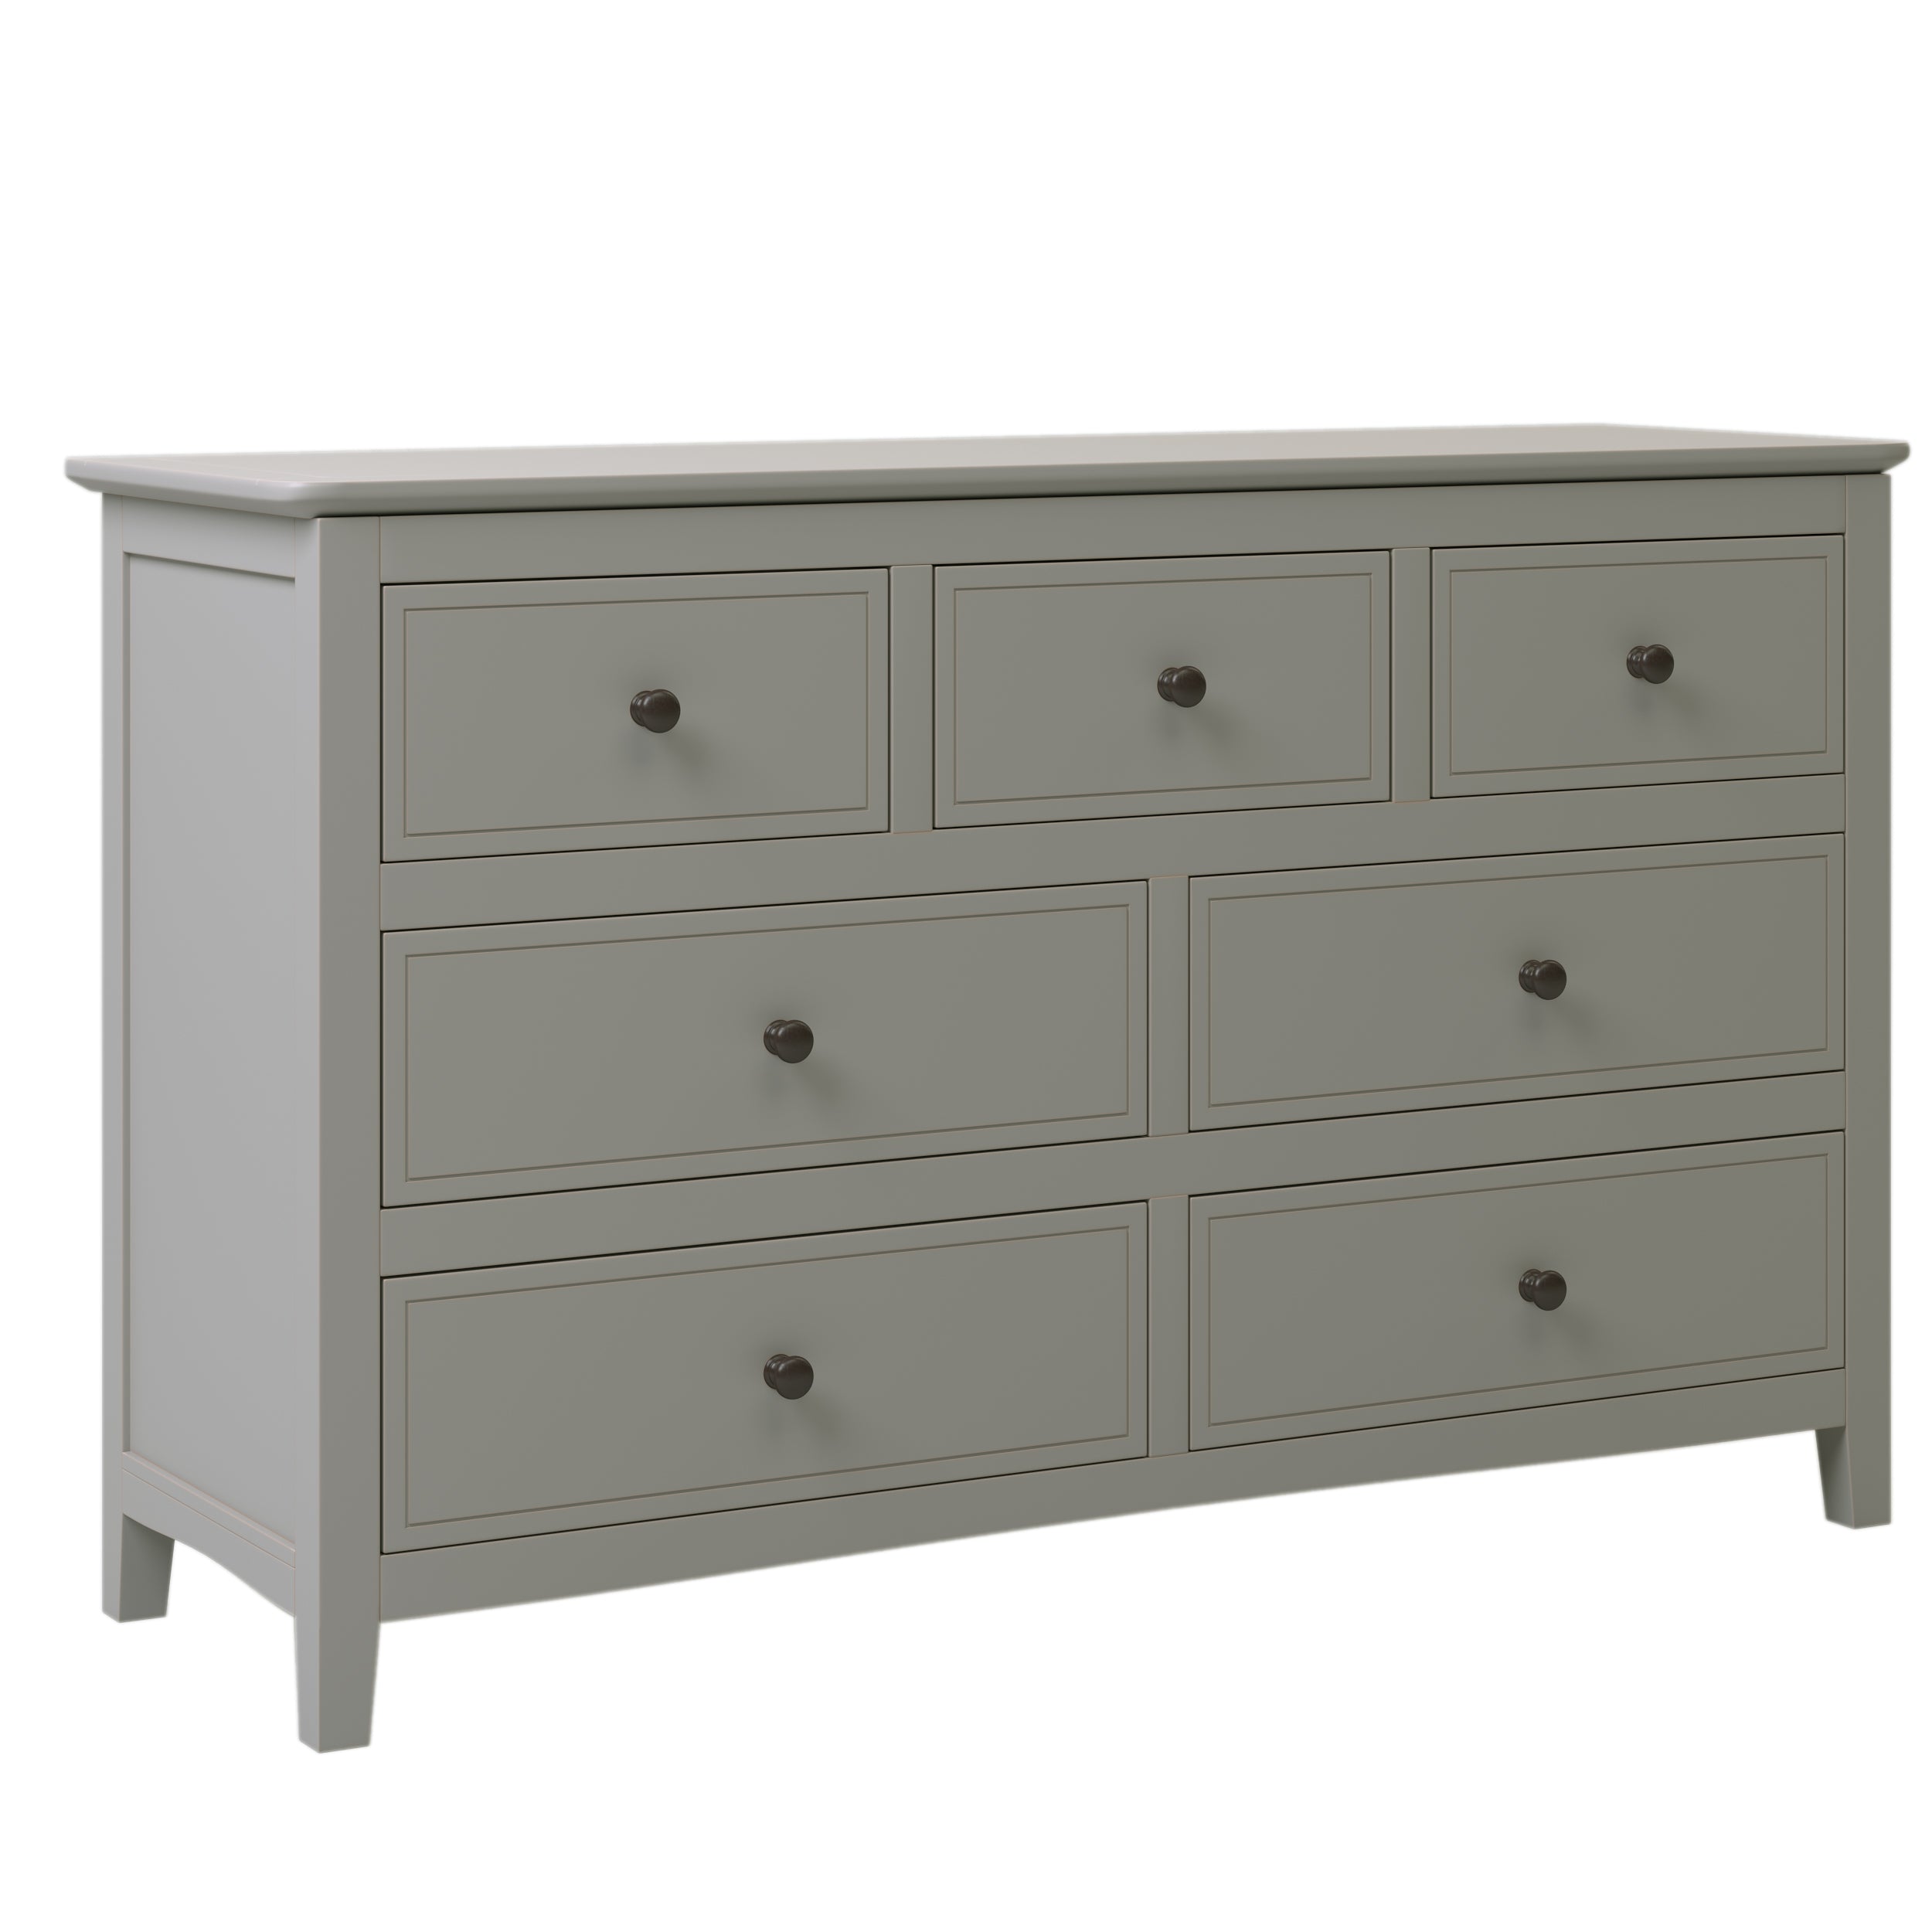 7 Drawers Solid Wood Dresser (Gray)